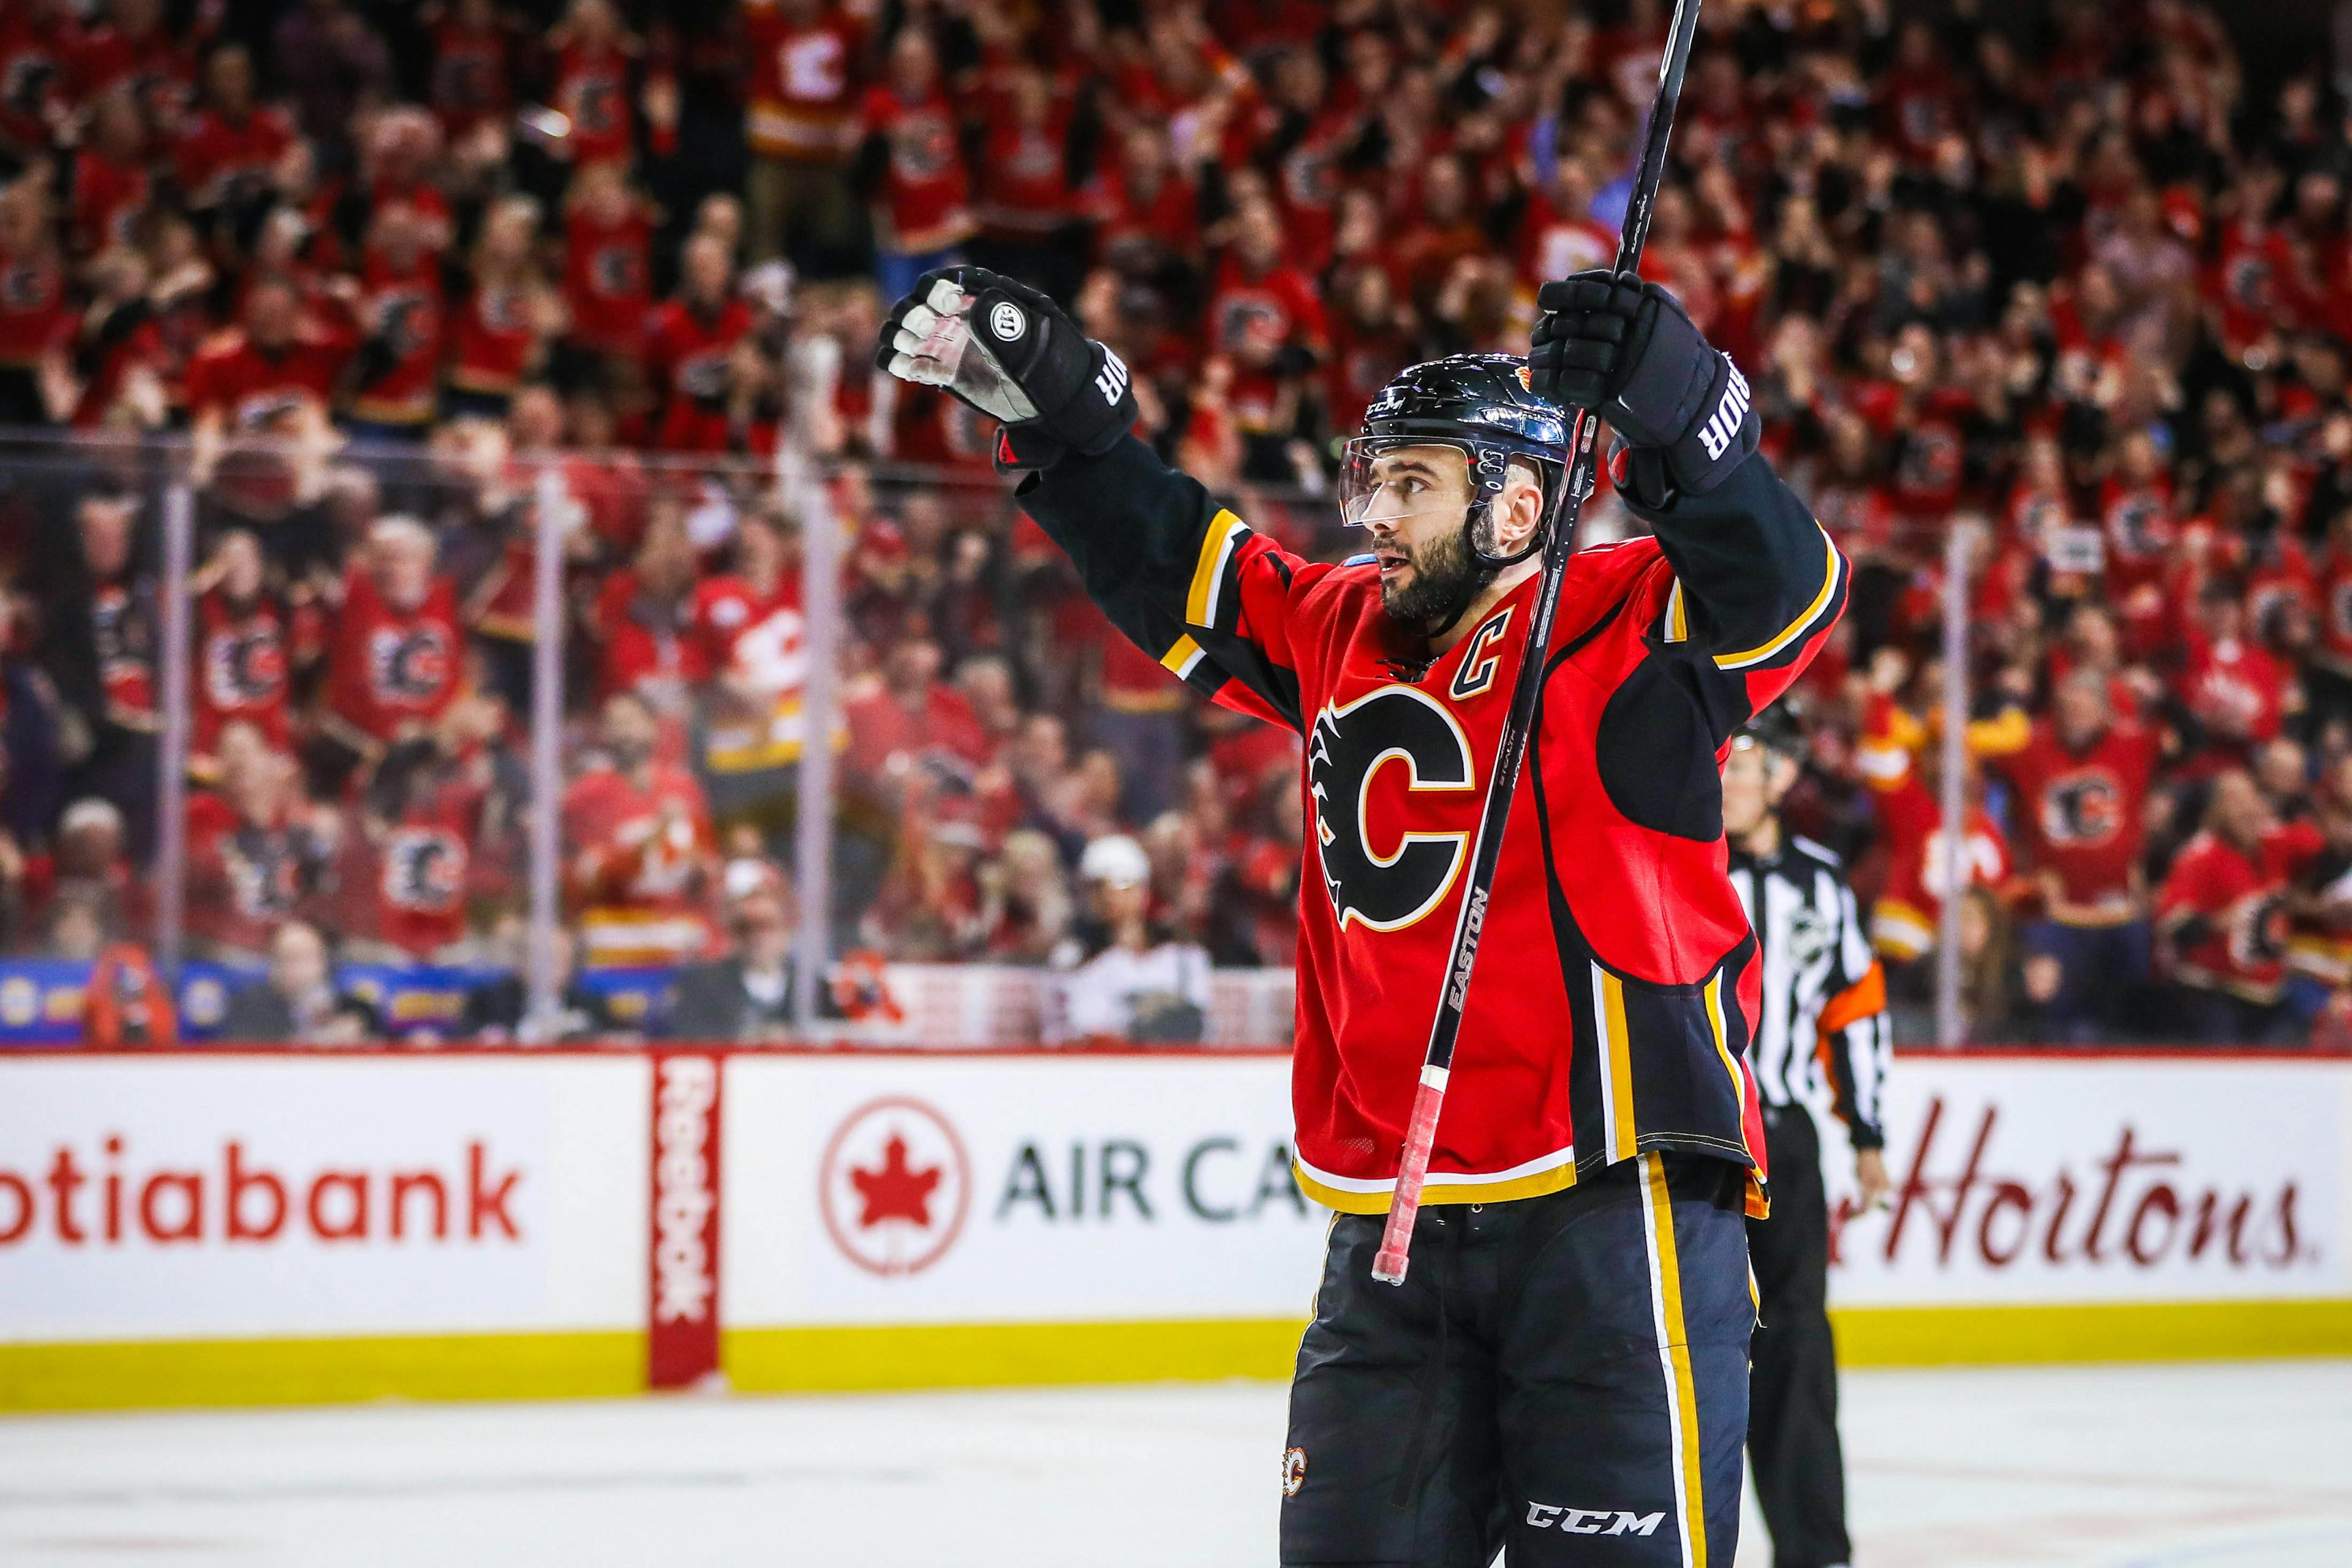 Mark Giordano, injured captain, not giving up on Flames